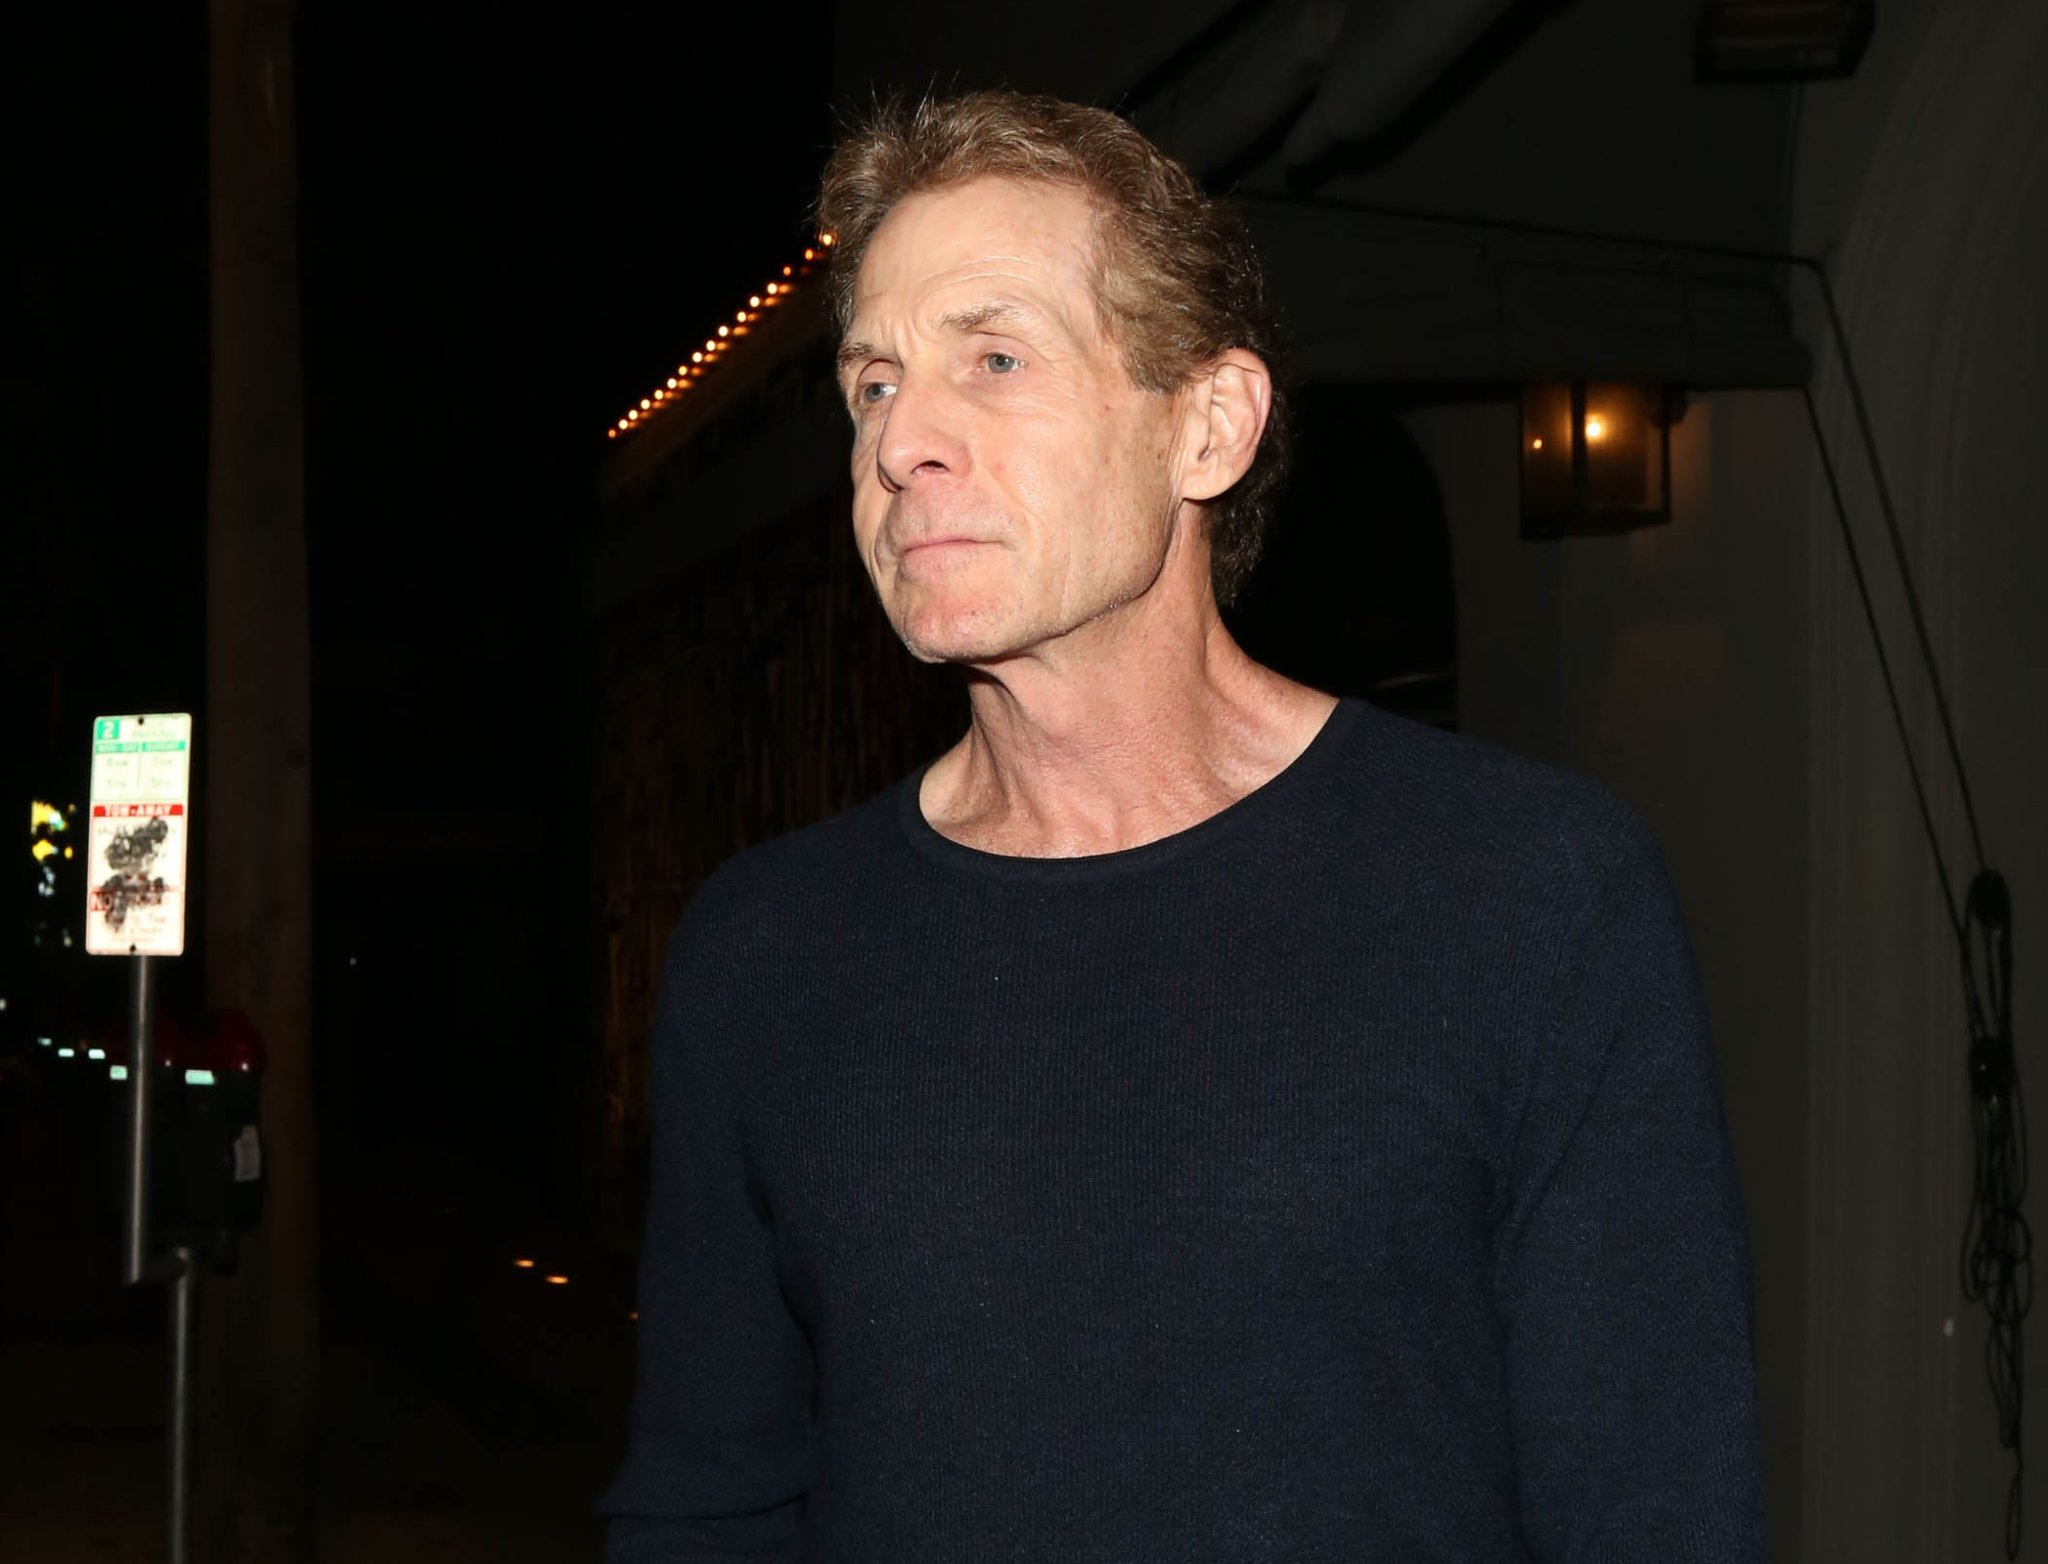 People aren't happy about Skip Bayless taking shots at LeBron's son